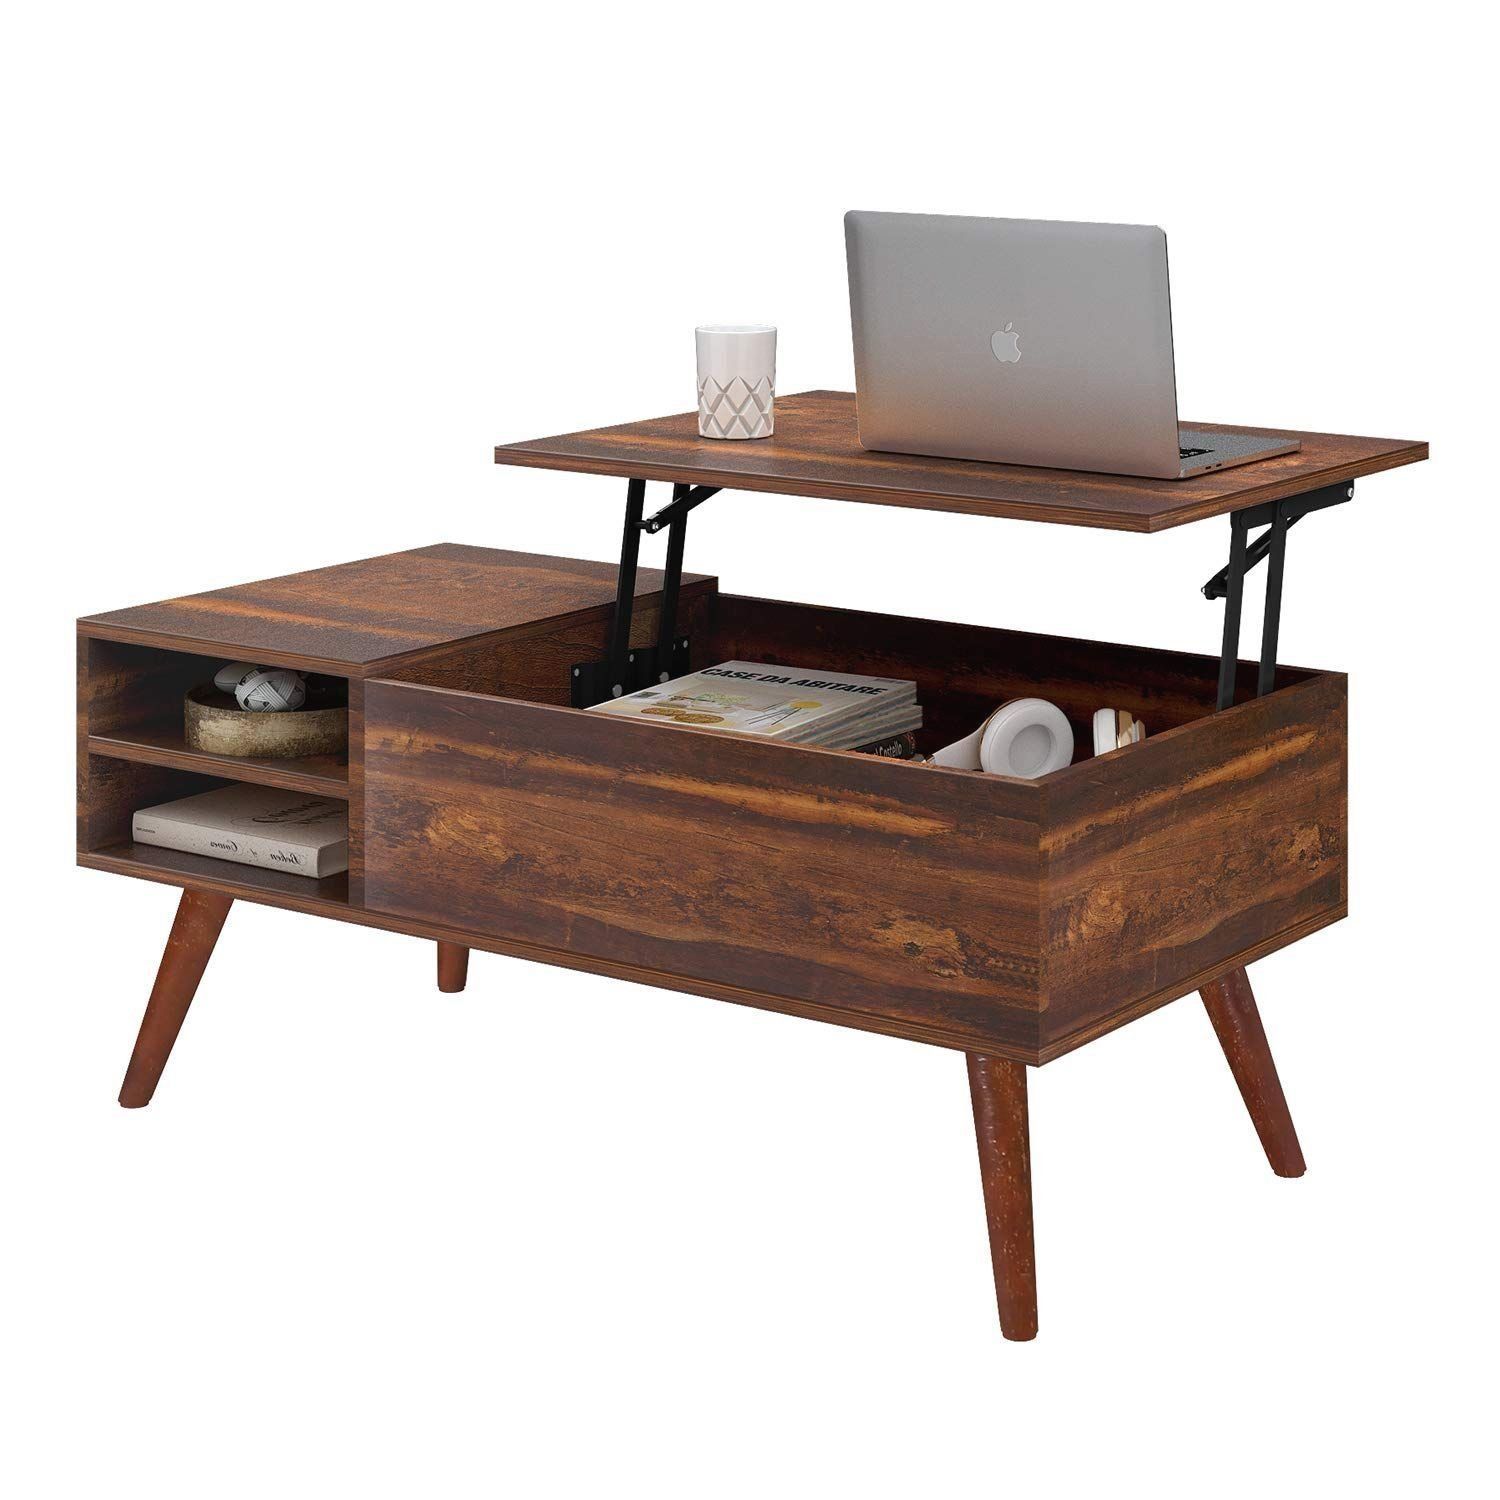 Wlive Wood Lift Top Coffee Table With Hidden Compartment And Storage In Modern Coffee Tables With Hidden Storage Compartments (Gallery 11 of 20)